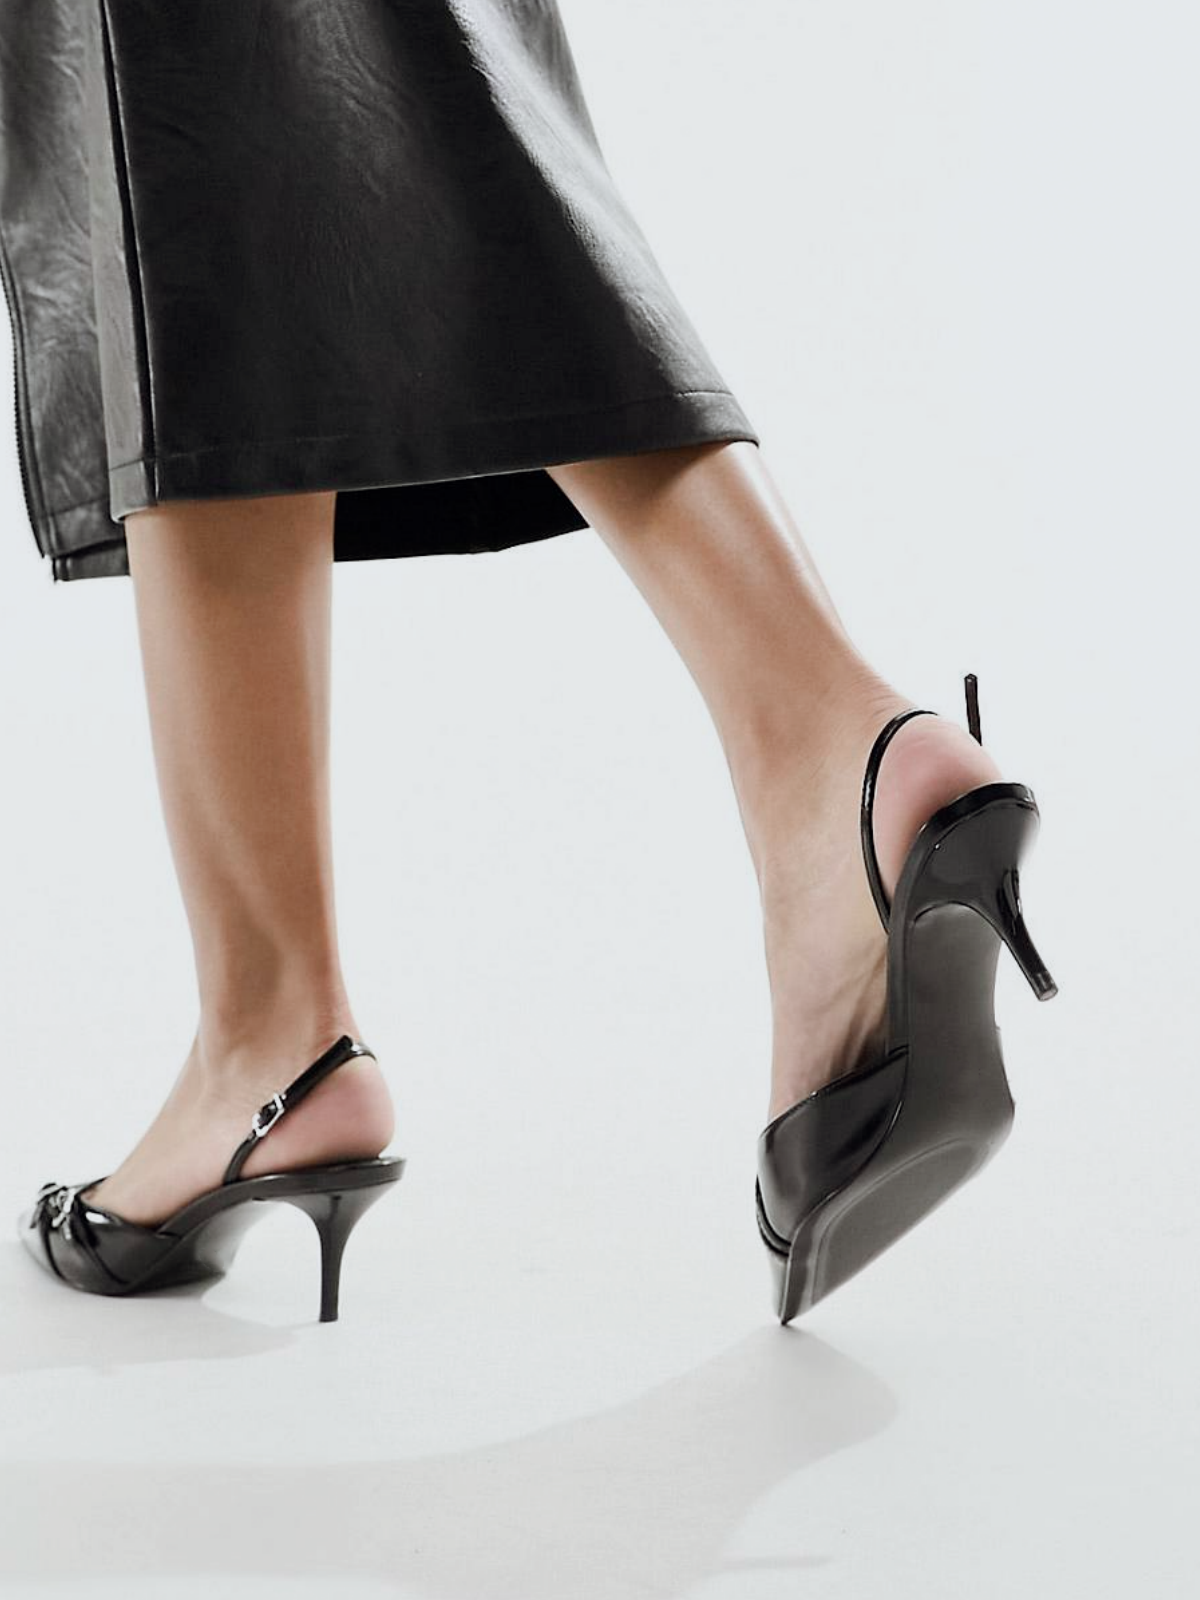 Black Buckled Strappy Pointy Kitten Heels Slingback Courts Pumps